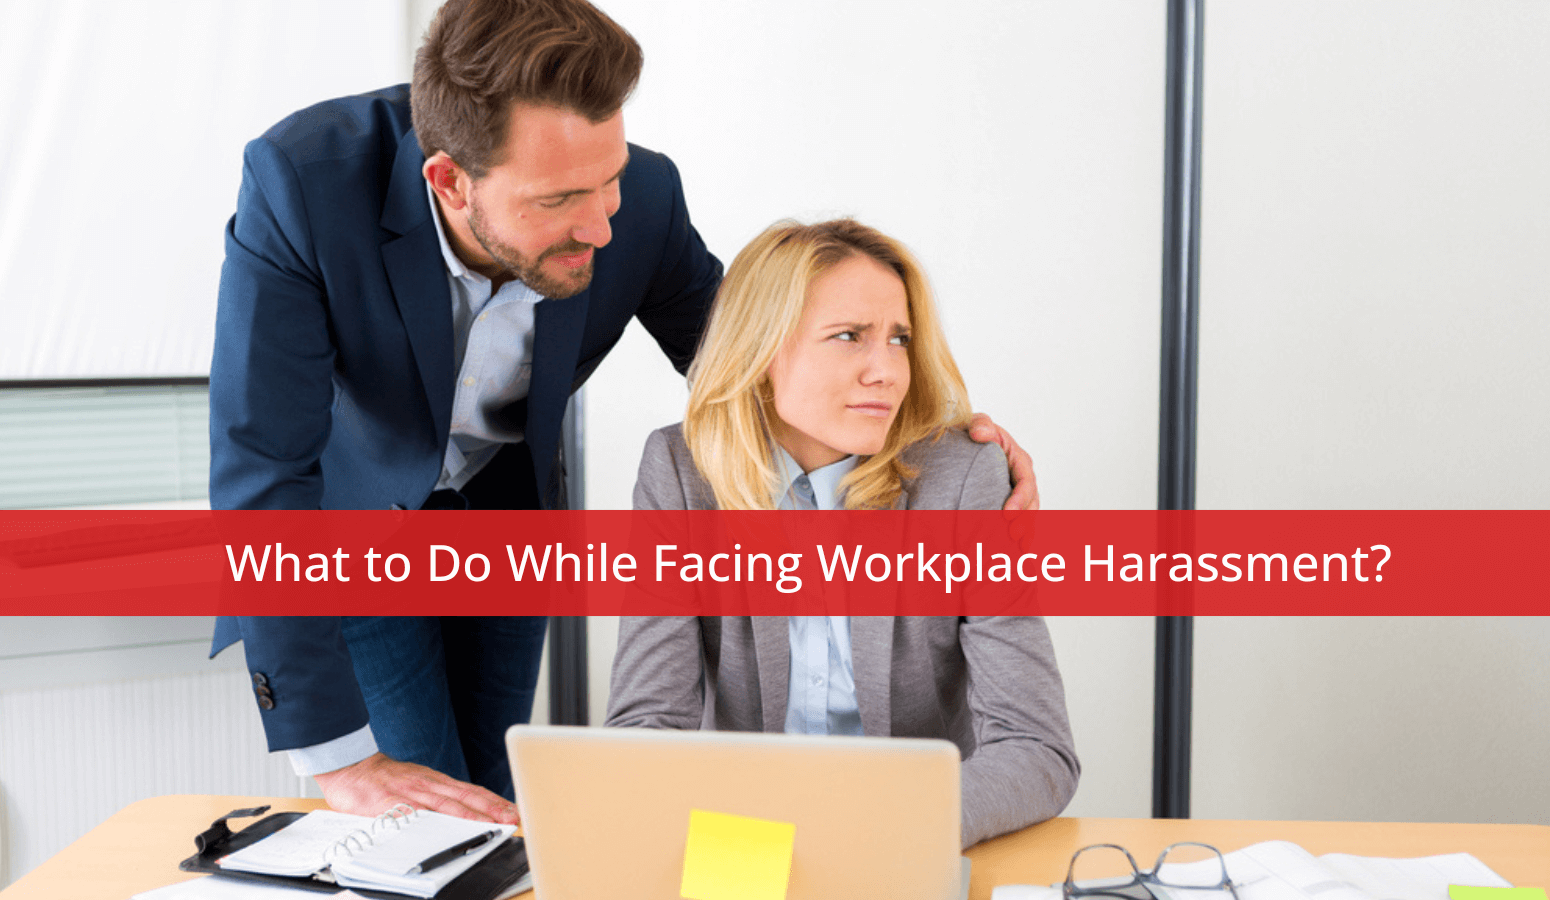 Featured image for “What to Do While Facing Workplace Harassment?”